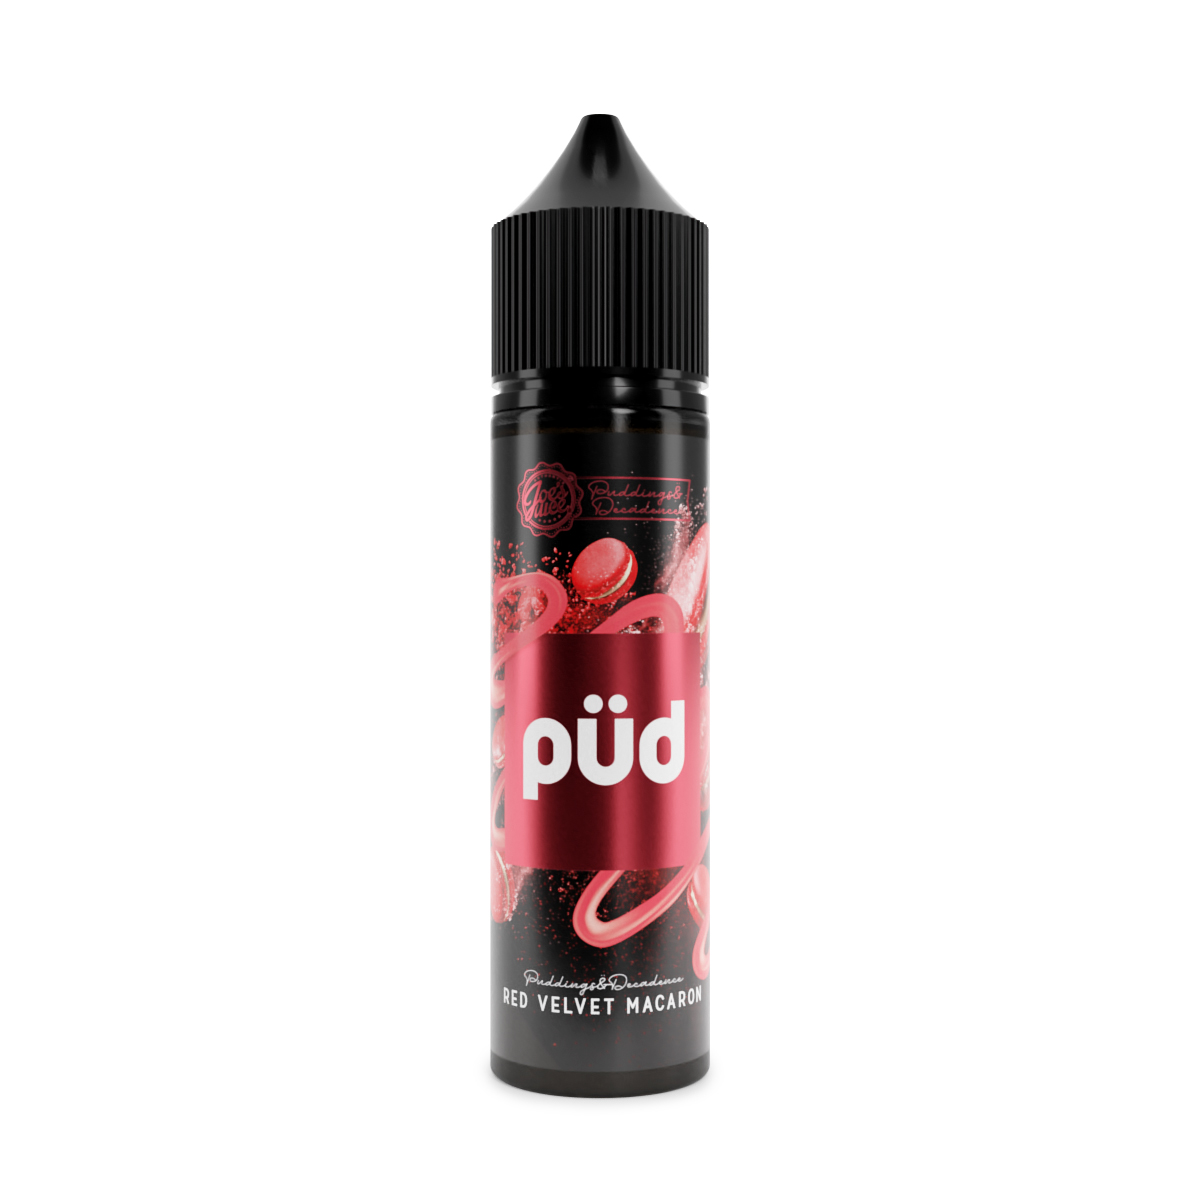 PUD - Red Velvet Macaron Flavour Concentrate by Joe's Juice